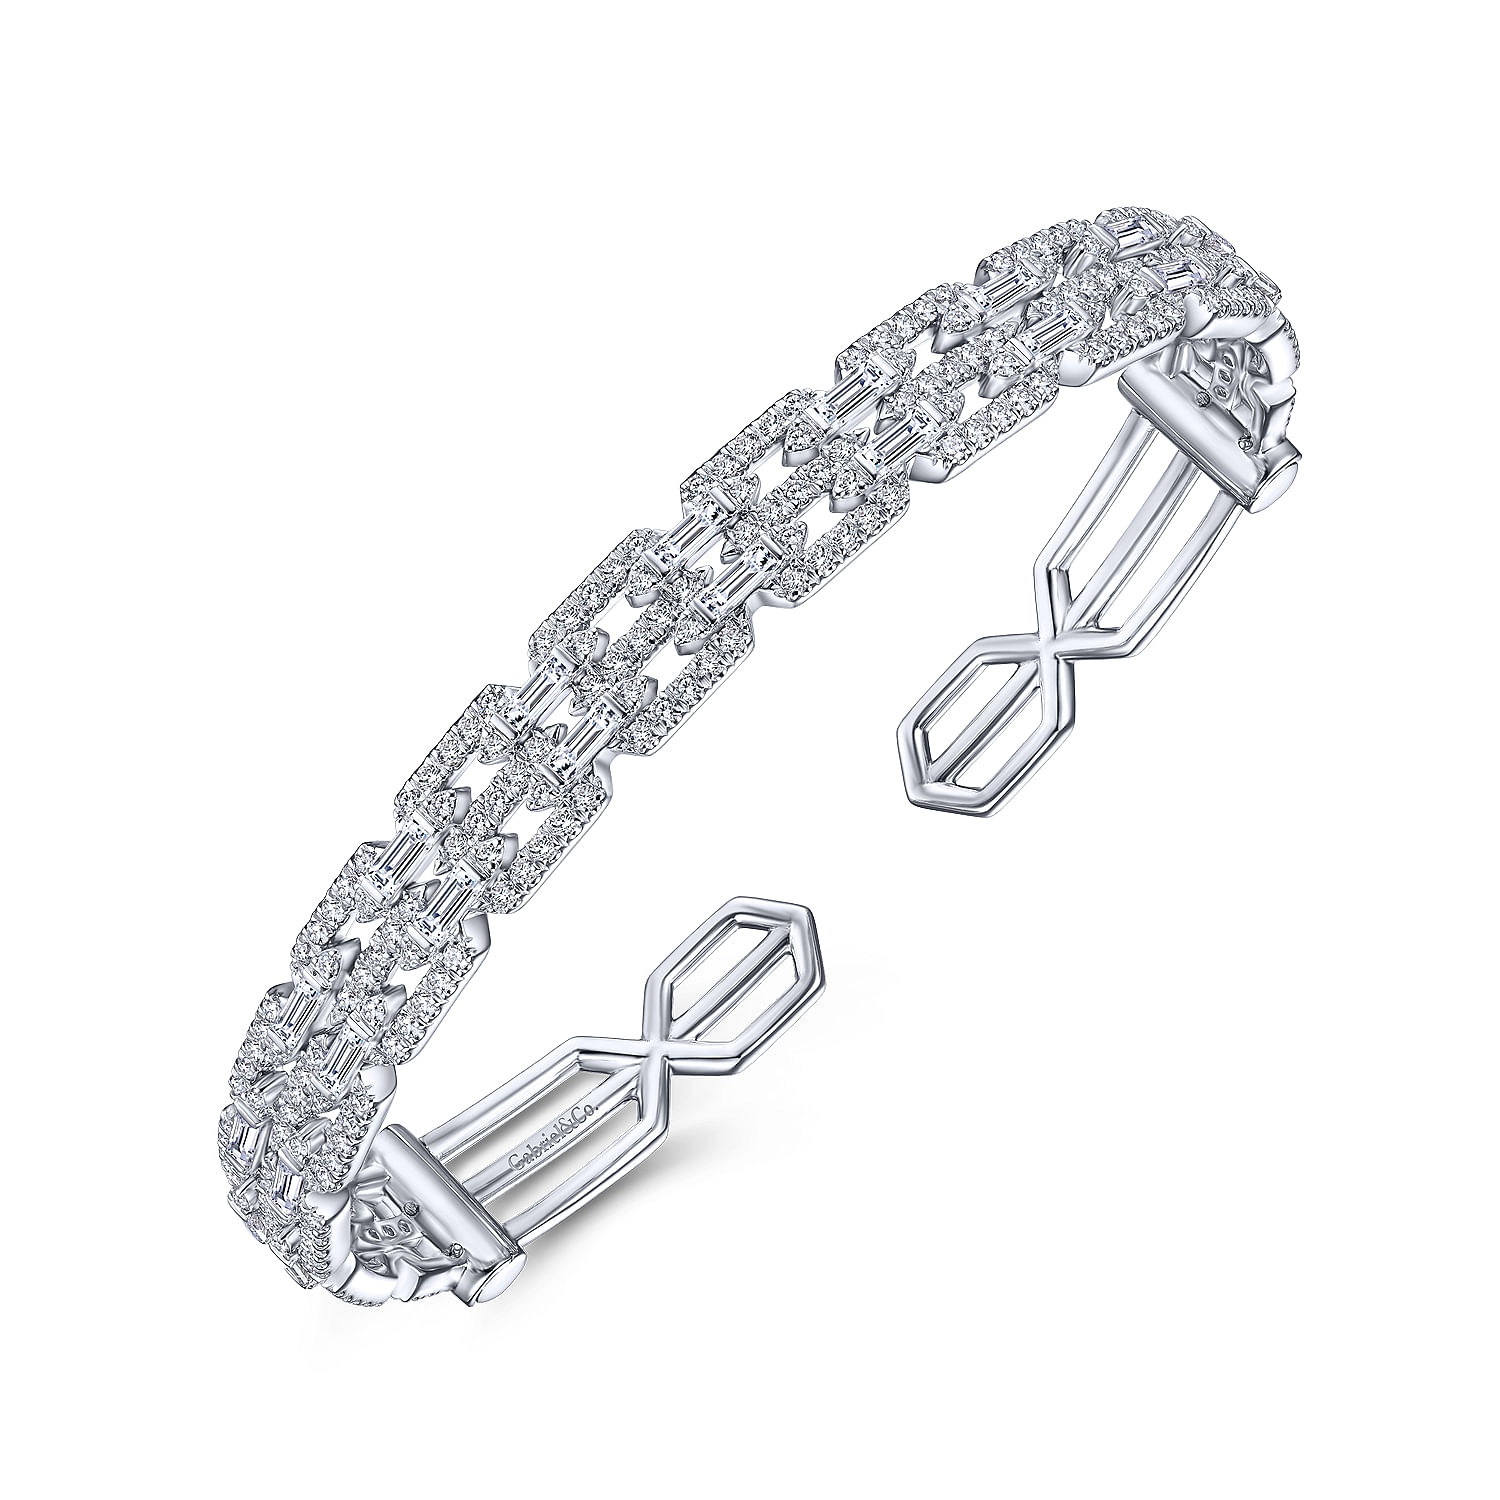 14K White Gold Diamond Link Cuff with Diamond Baguette Spacers